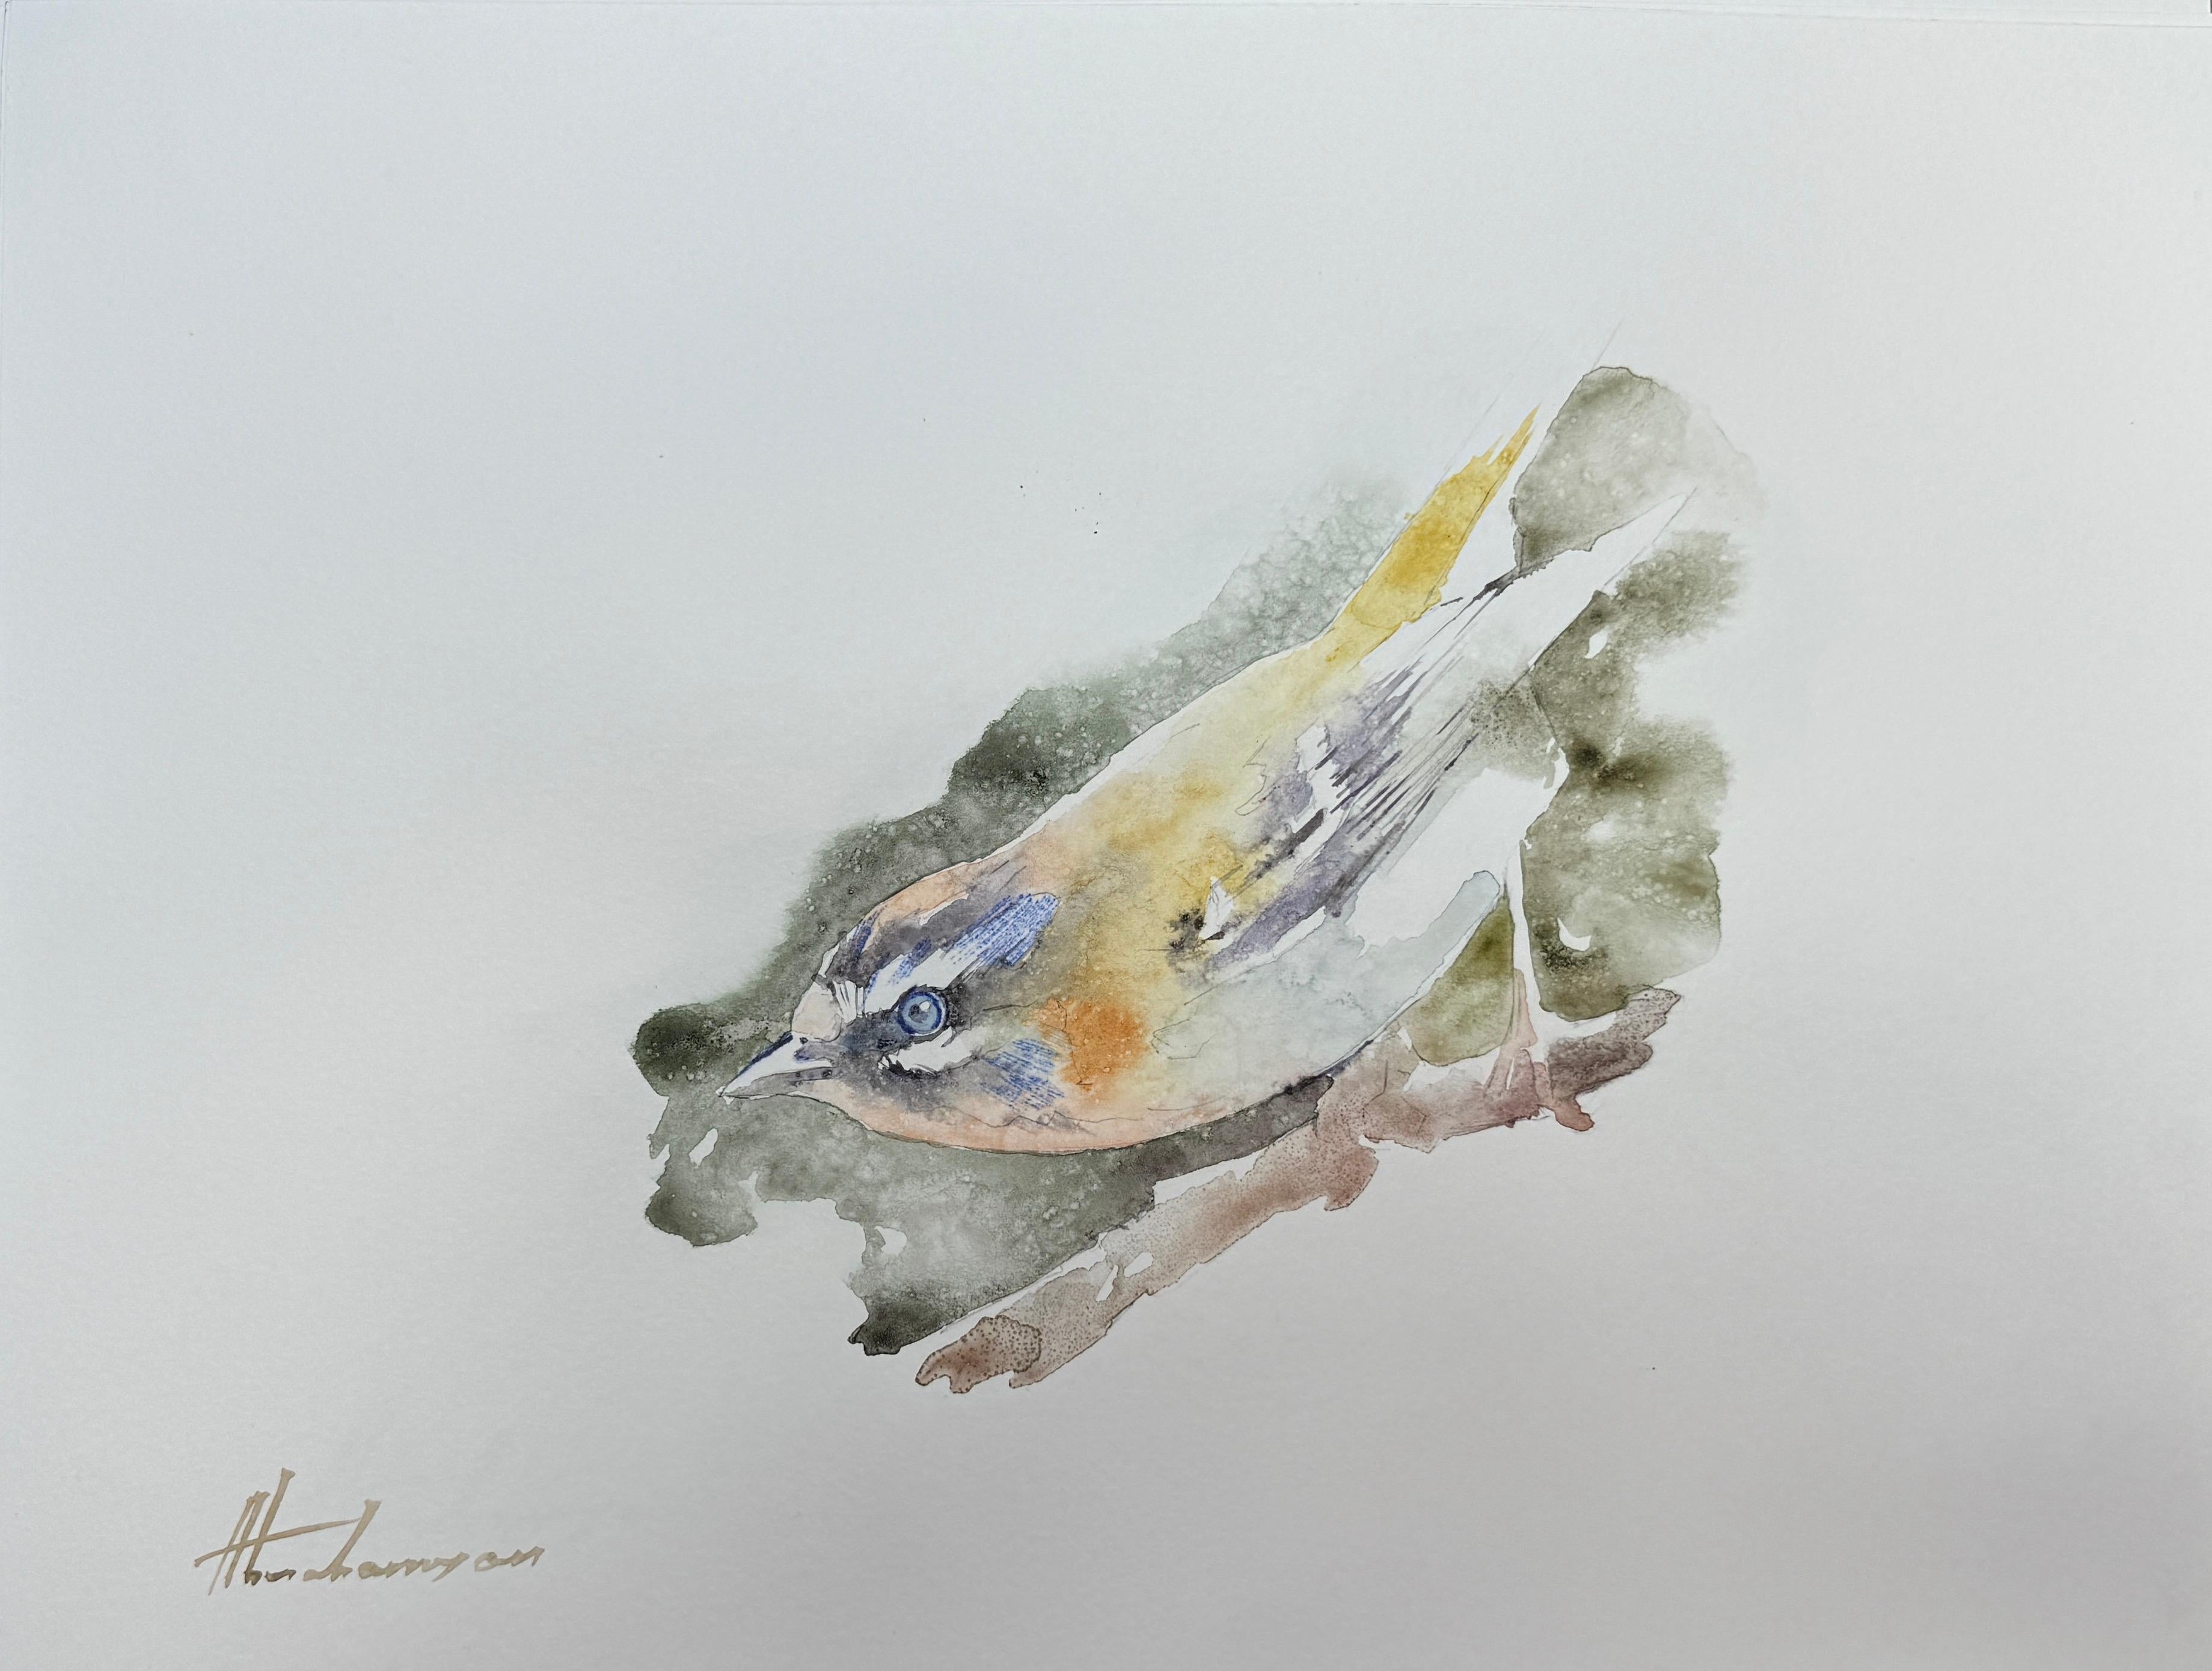 Artyom Abrahamyan Animal Art - Warbler, Bird, Watercolor on Paper, Handmade Painting, One of a Kind